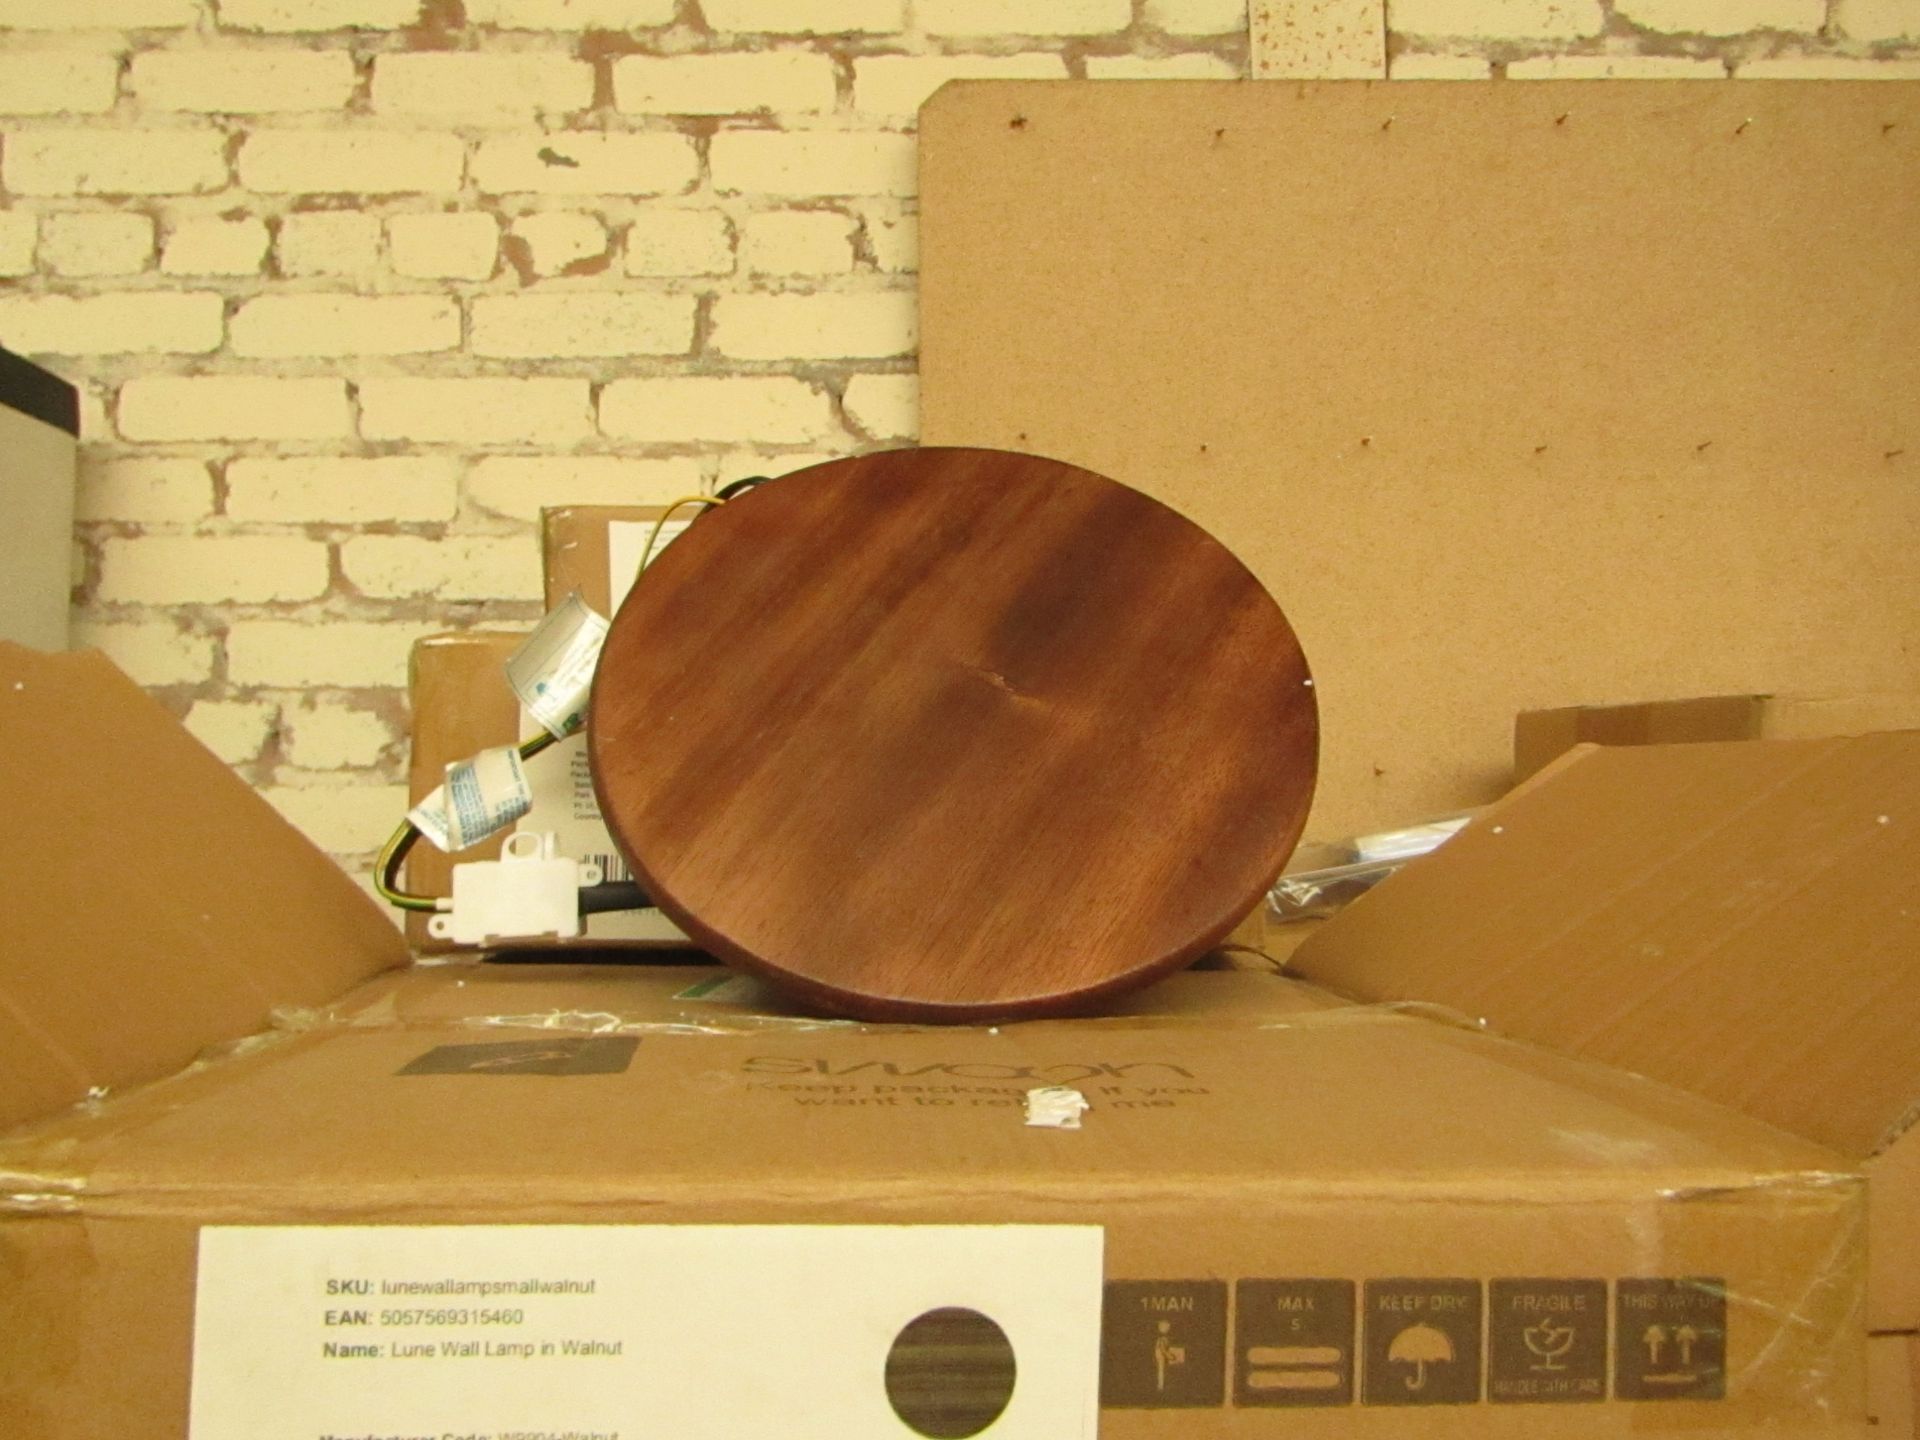 | 1x | SWOON LUNE WALL LIGHT IN WALNUT | LOOKS UNUSED AND BOXED | RRP £79 |